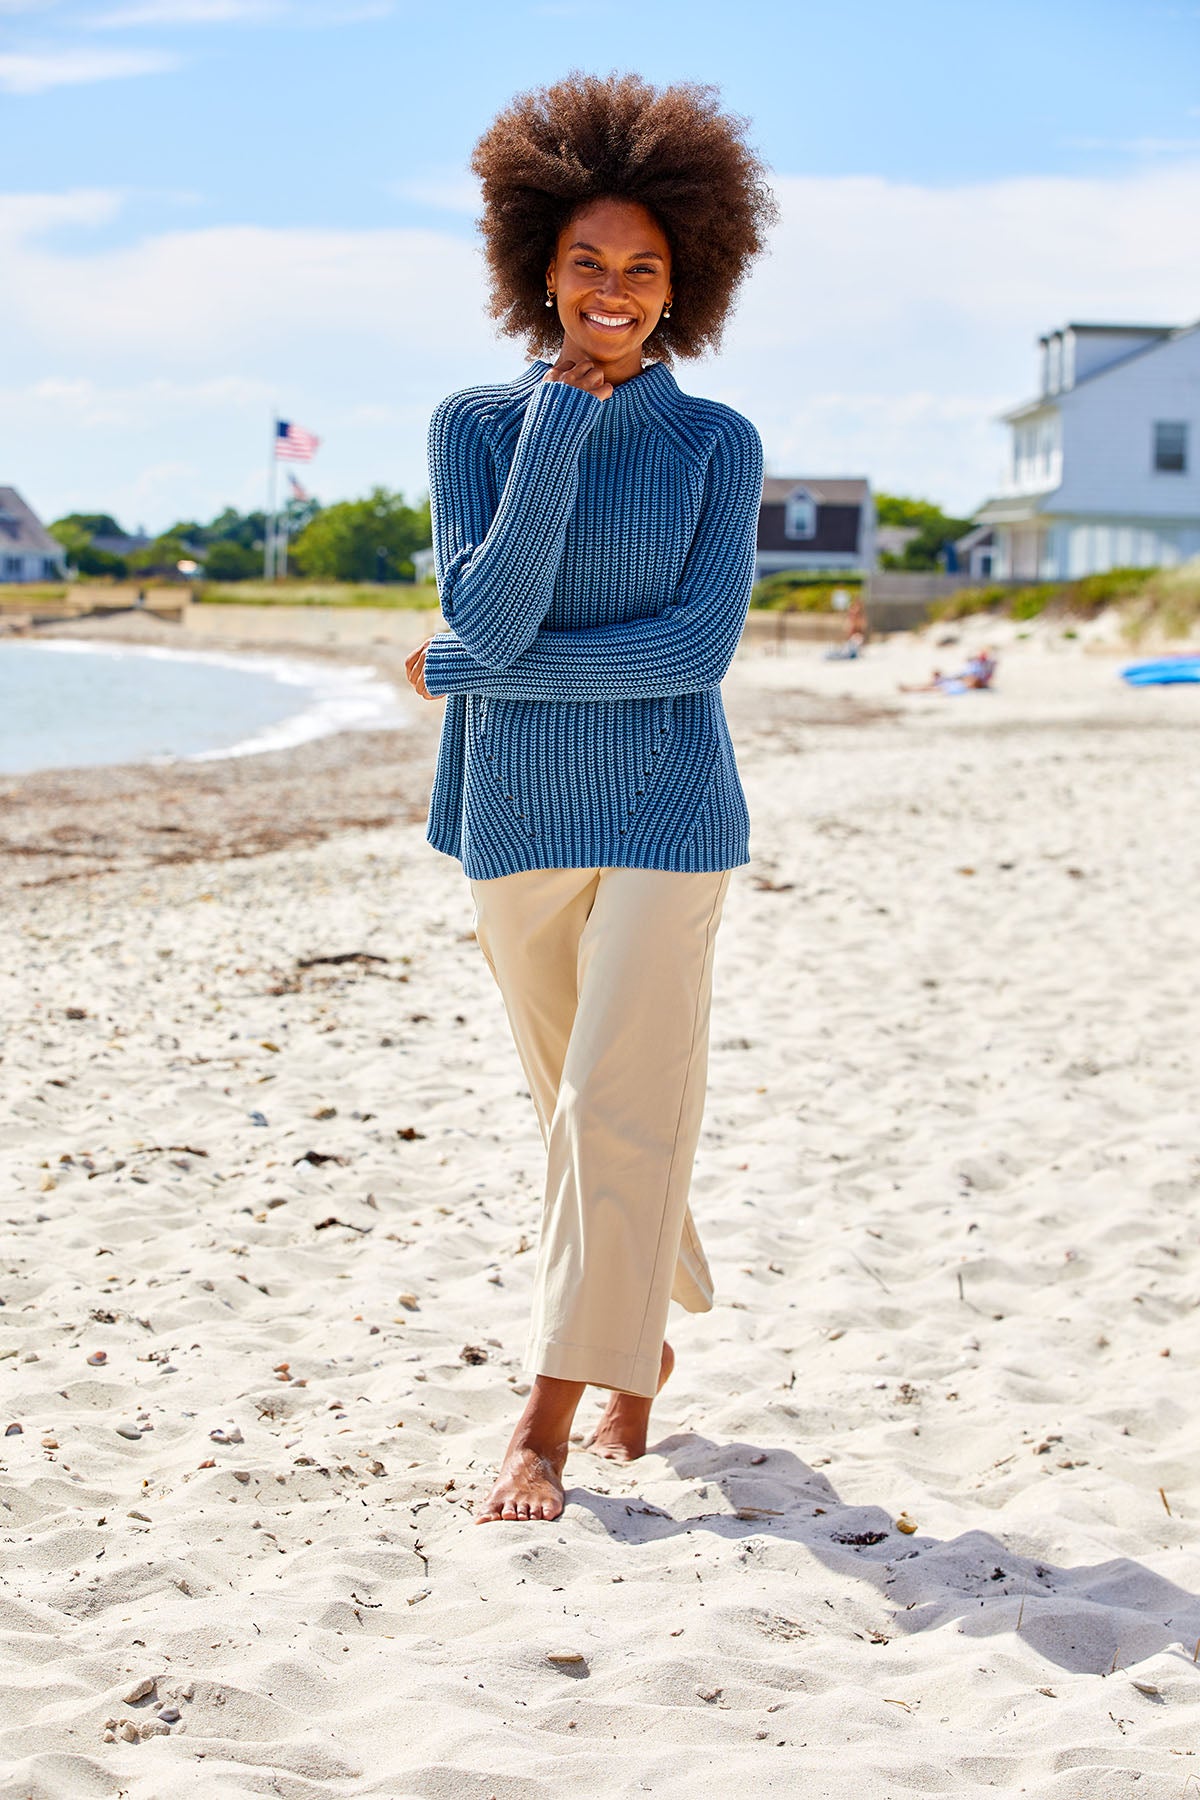 Woman on the beach wearing sand pants and a blue sweater